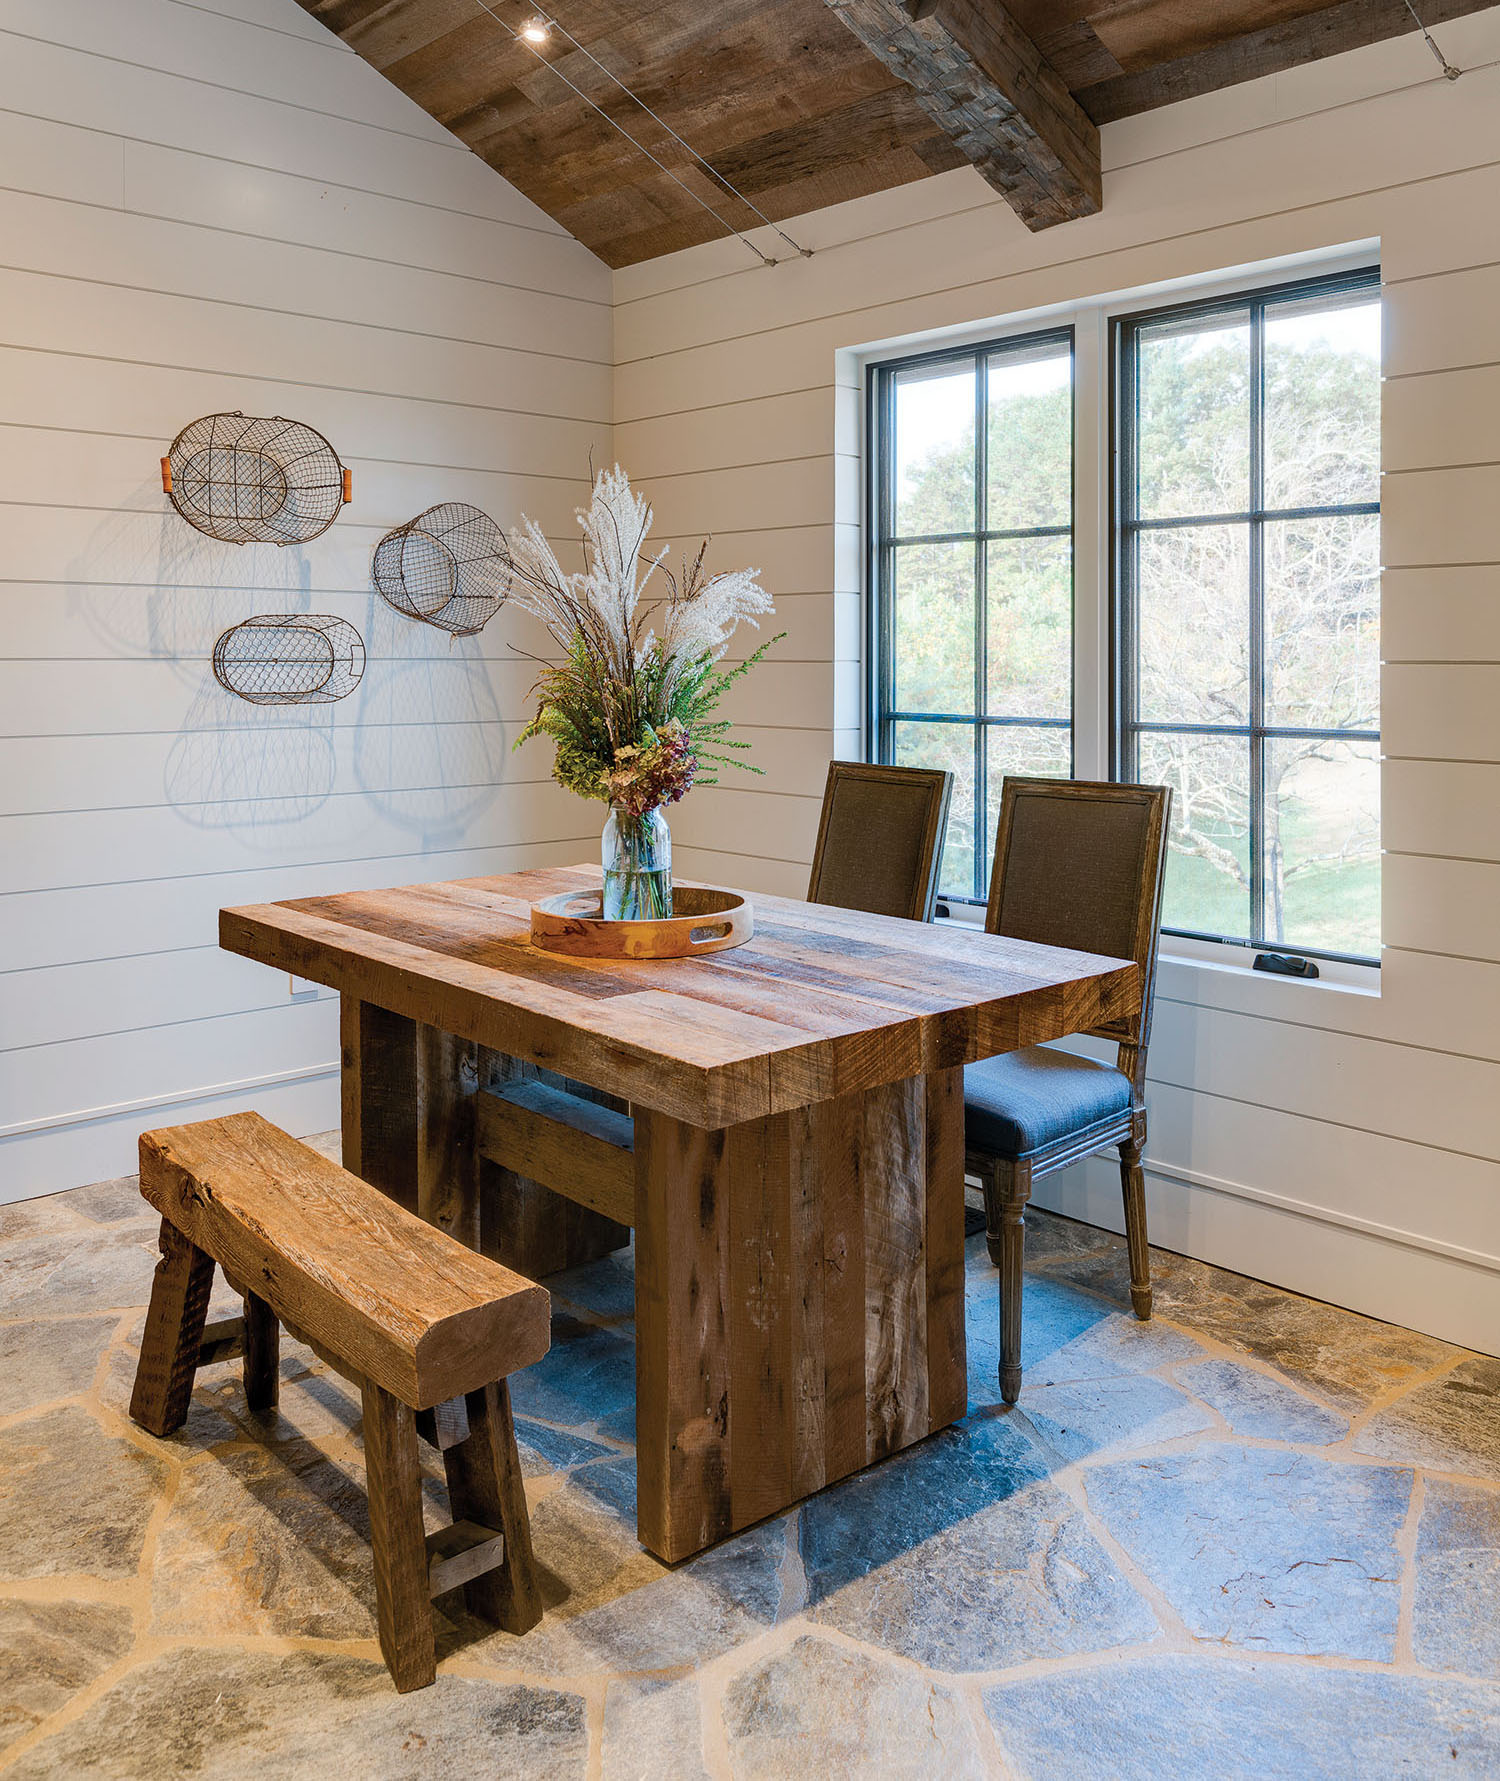 The handcrafted dining table is by Chad Corey Construction. Photo by Kevin Meechan